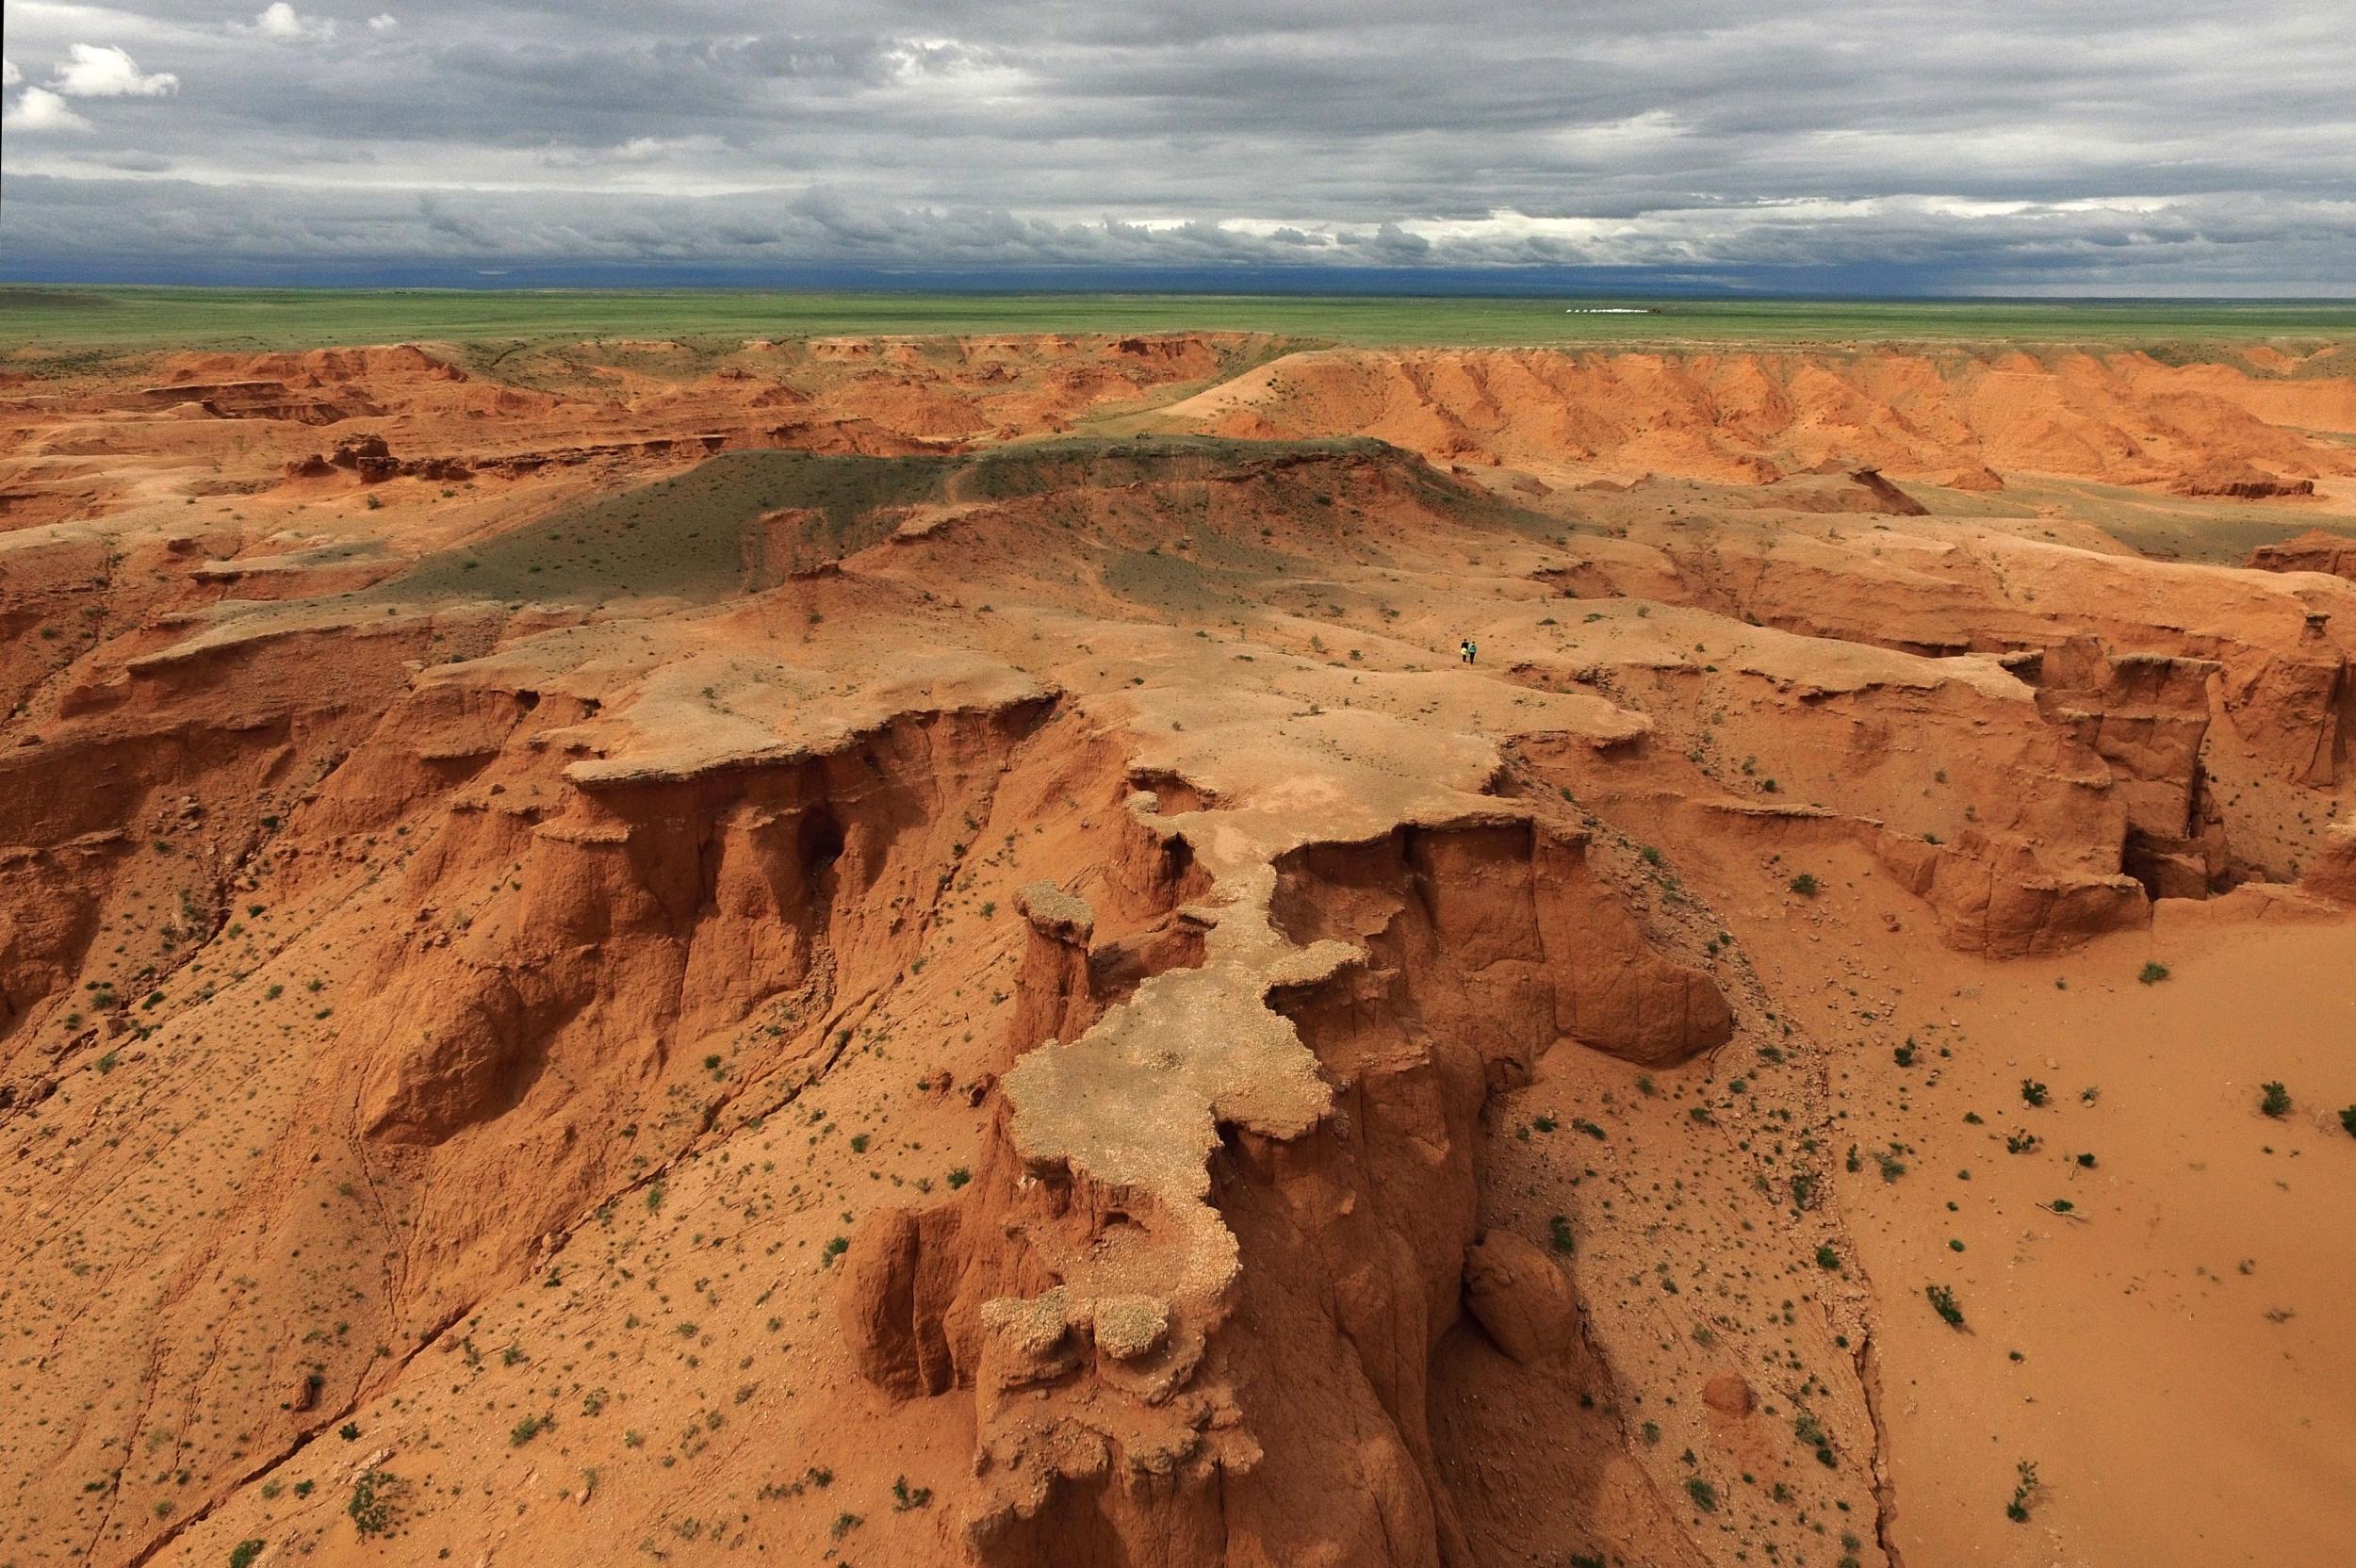 The Flaming Cliffs area of the Gobi desert is famed for its dinosaur fossils